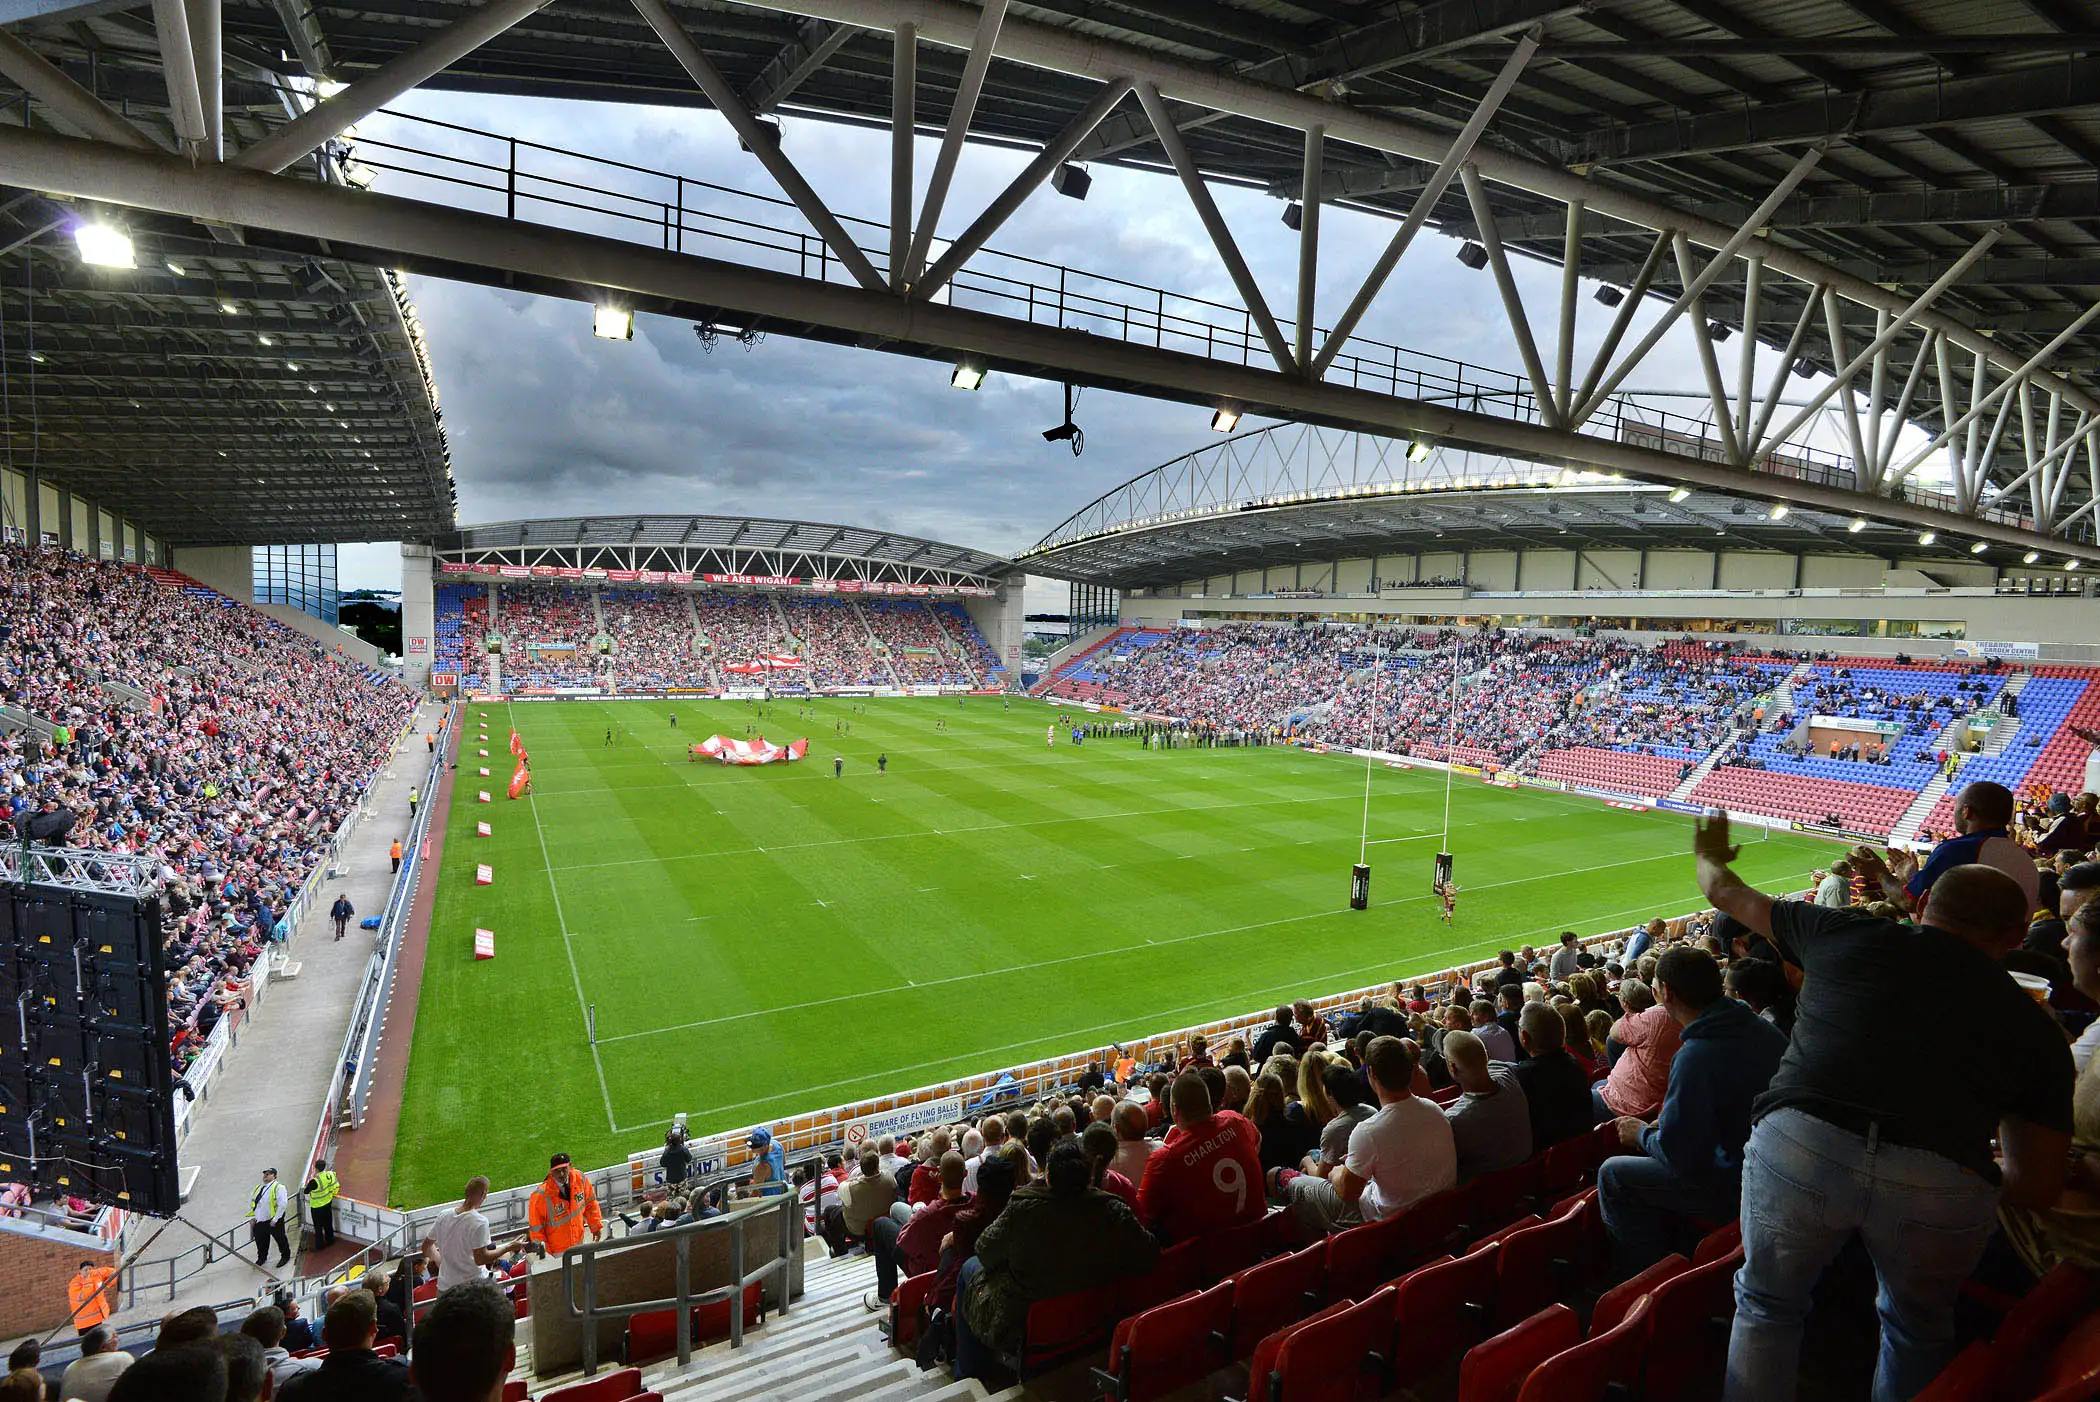 Wigan first-team player charged with drink-driving